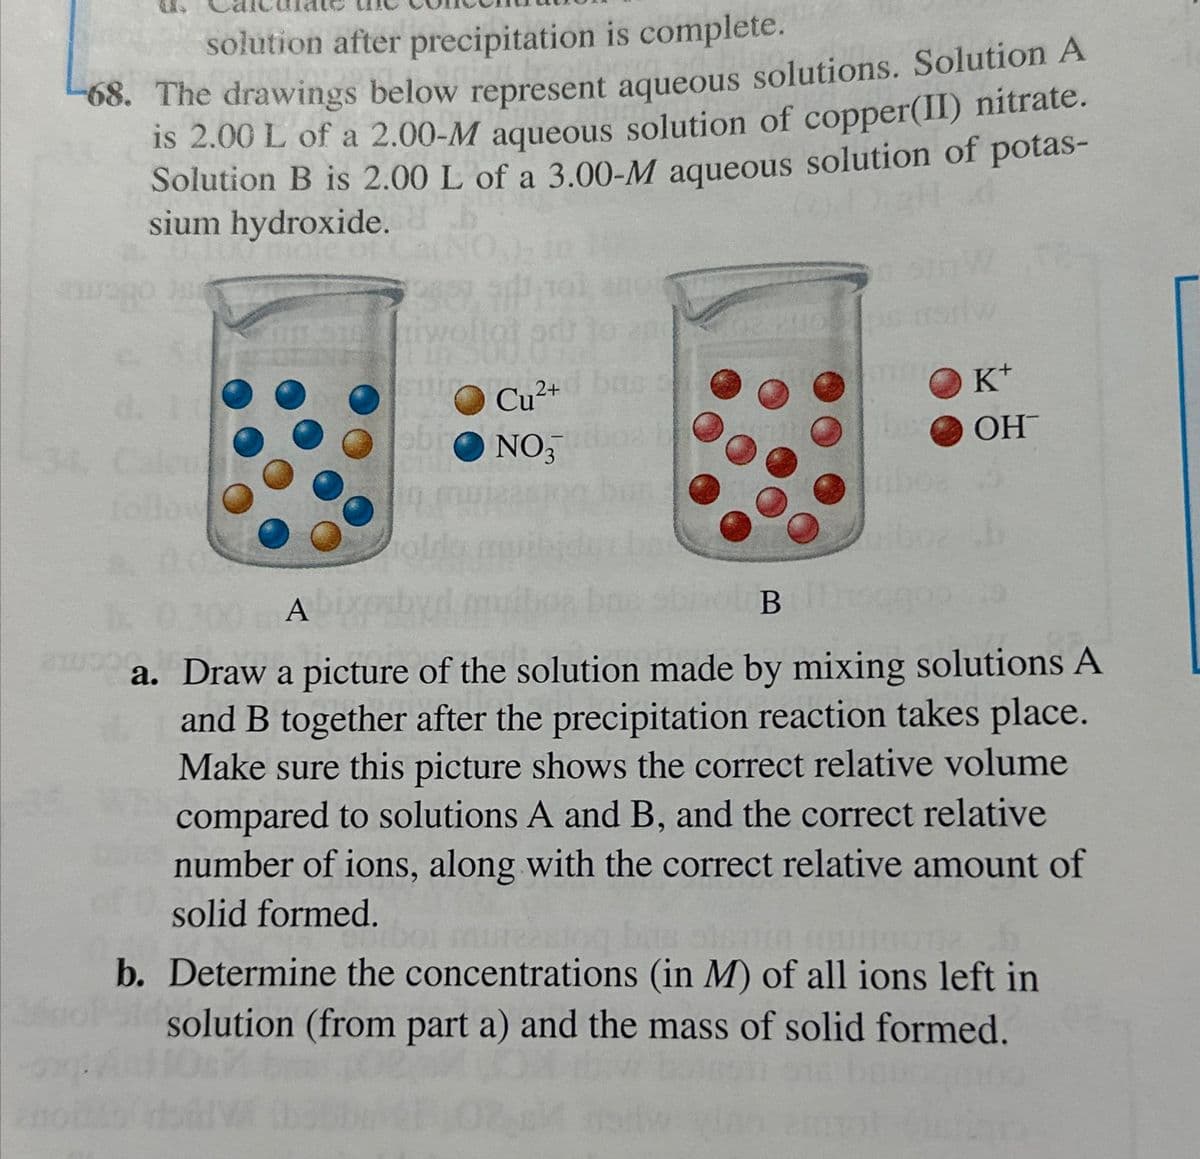 solution after precipitation is complete.
68. The drawings below represent aqueous solutions. Solution A
is 2.00 L of a 2.00-M aqueous solution of copper(II) nitrate.
Solution B is 2.00 L of a 3.00-M aqueous solution of potas-
sium hydroxide.
(0)
suiro Cu²+
ebro NO3
БО
K+
OH™
A
B
a. Draw a picture of the solution made by mixing solutions A
and B together after the precipitation reaction takes place.
Make sure this picture shows the correct relative volume
compared to solutions A and B, and the correct relative
number of ions, along with the correct relative amount of
solid formed.
b. Determine the concentrations (in M) of all ions left in
solution (from part a) and the mass of solid formed.